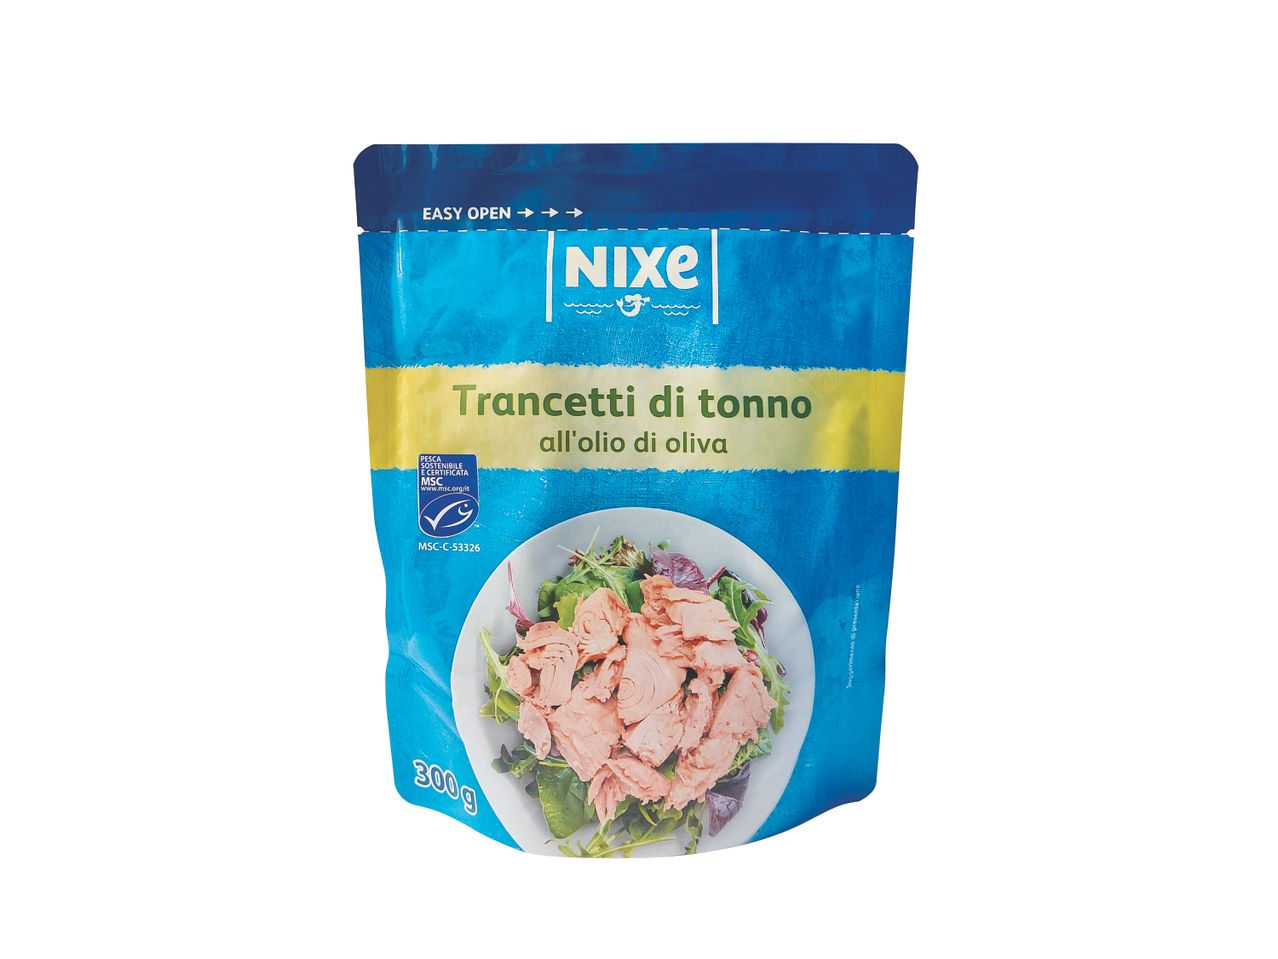 Go to full screen view: Tuna in Olive Oil in Pouch - Image 1